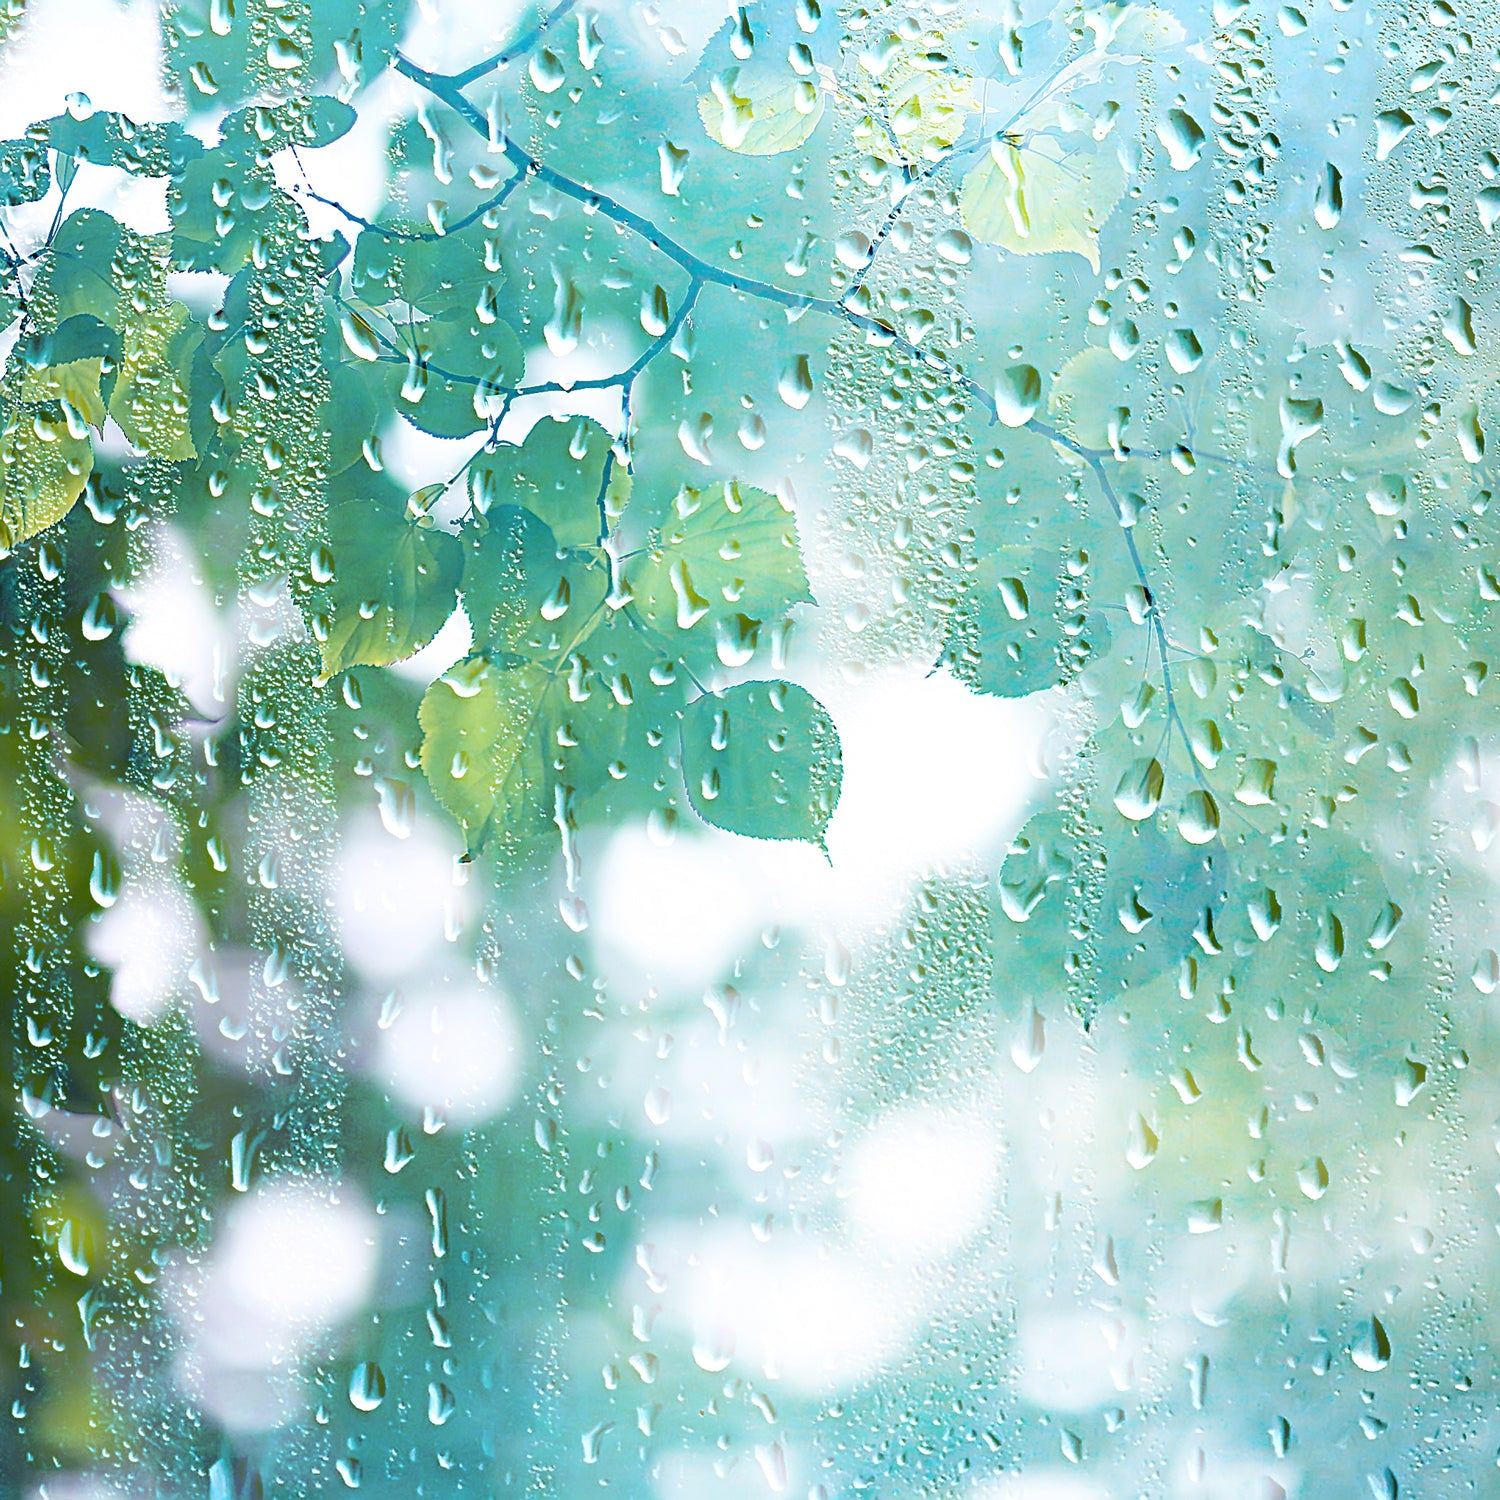 Rain on a windowpane - one of the inspirations for our Peony Blossom wax melts